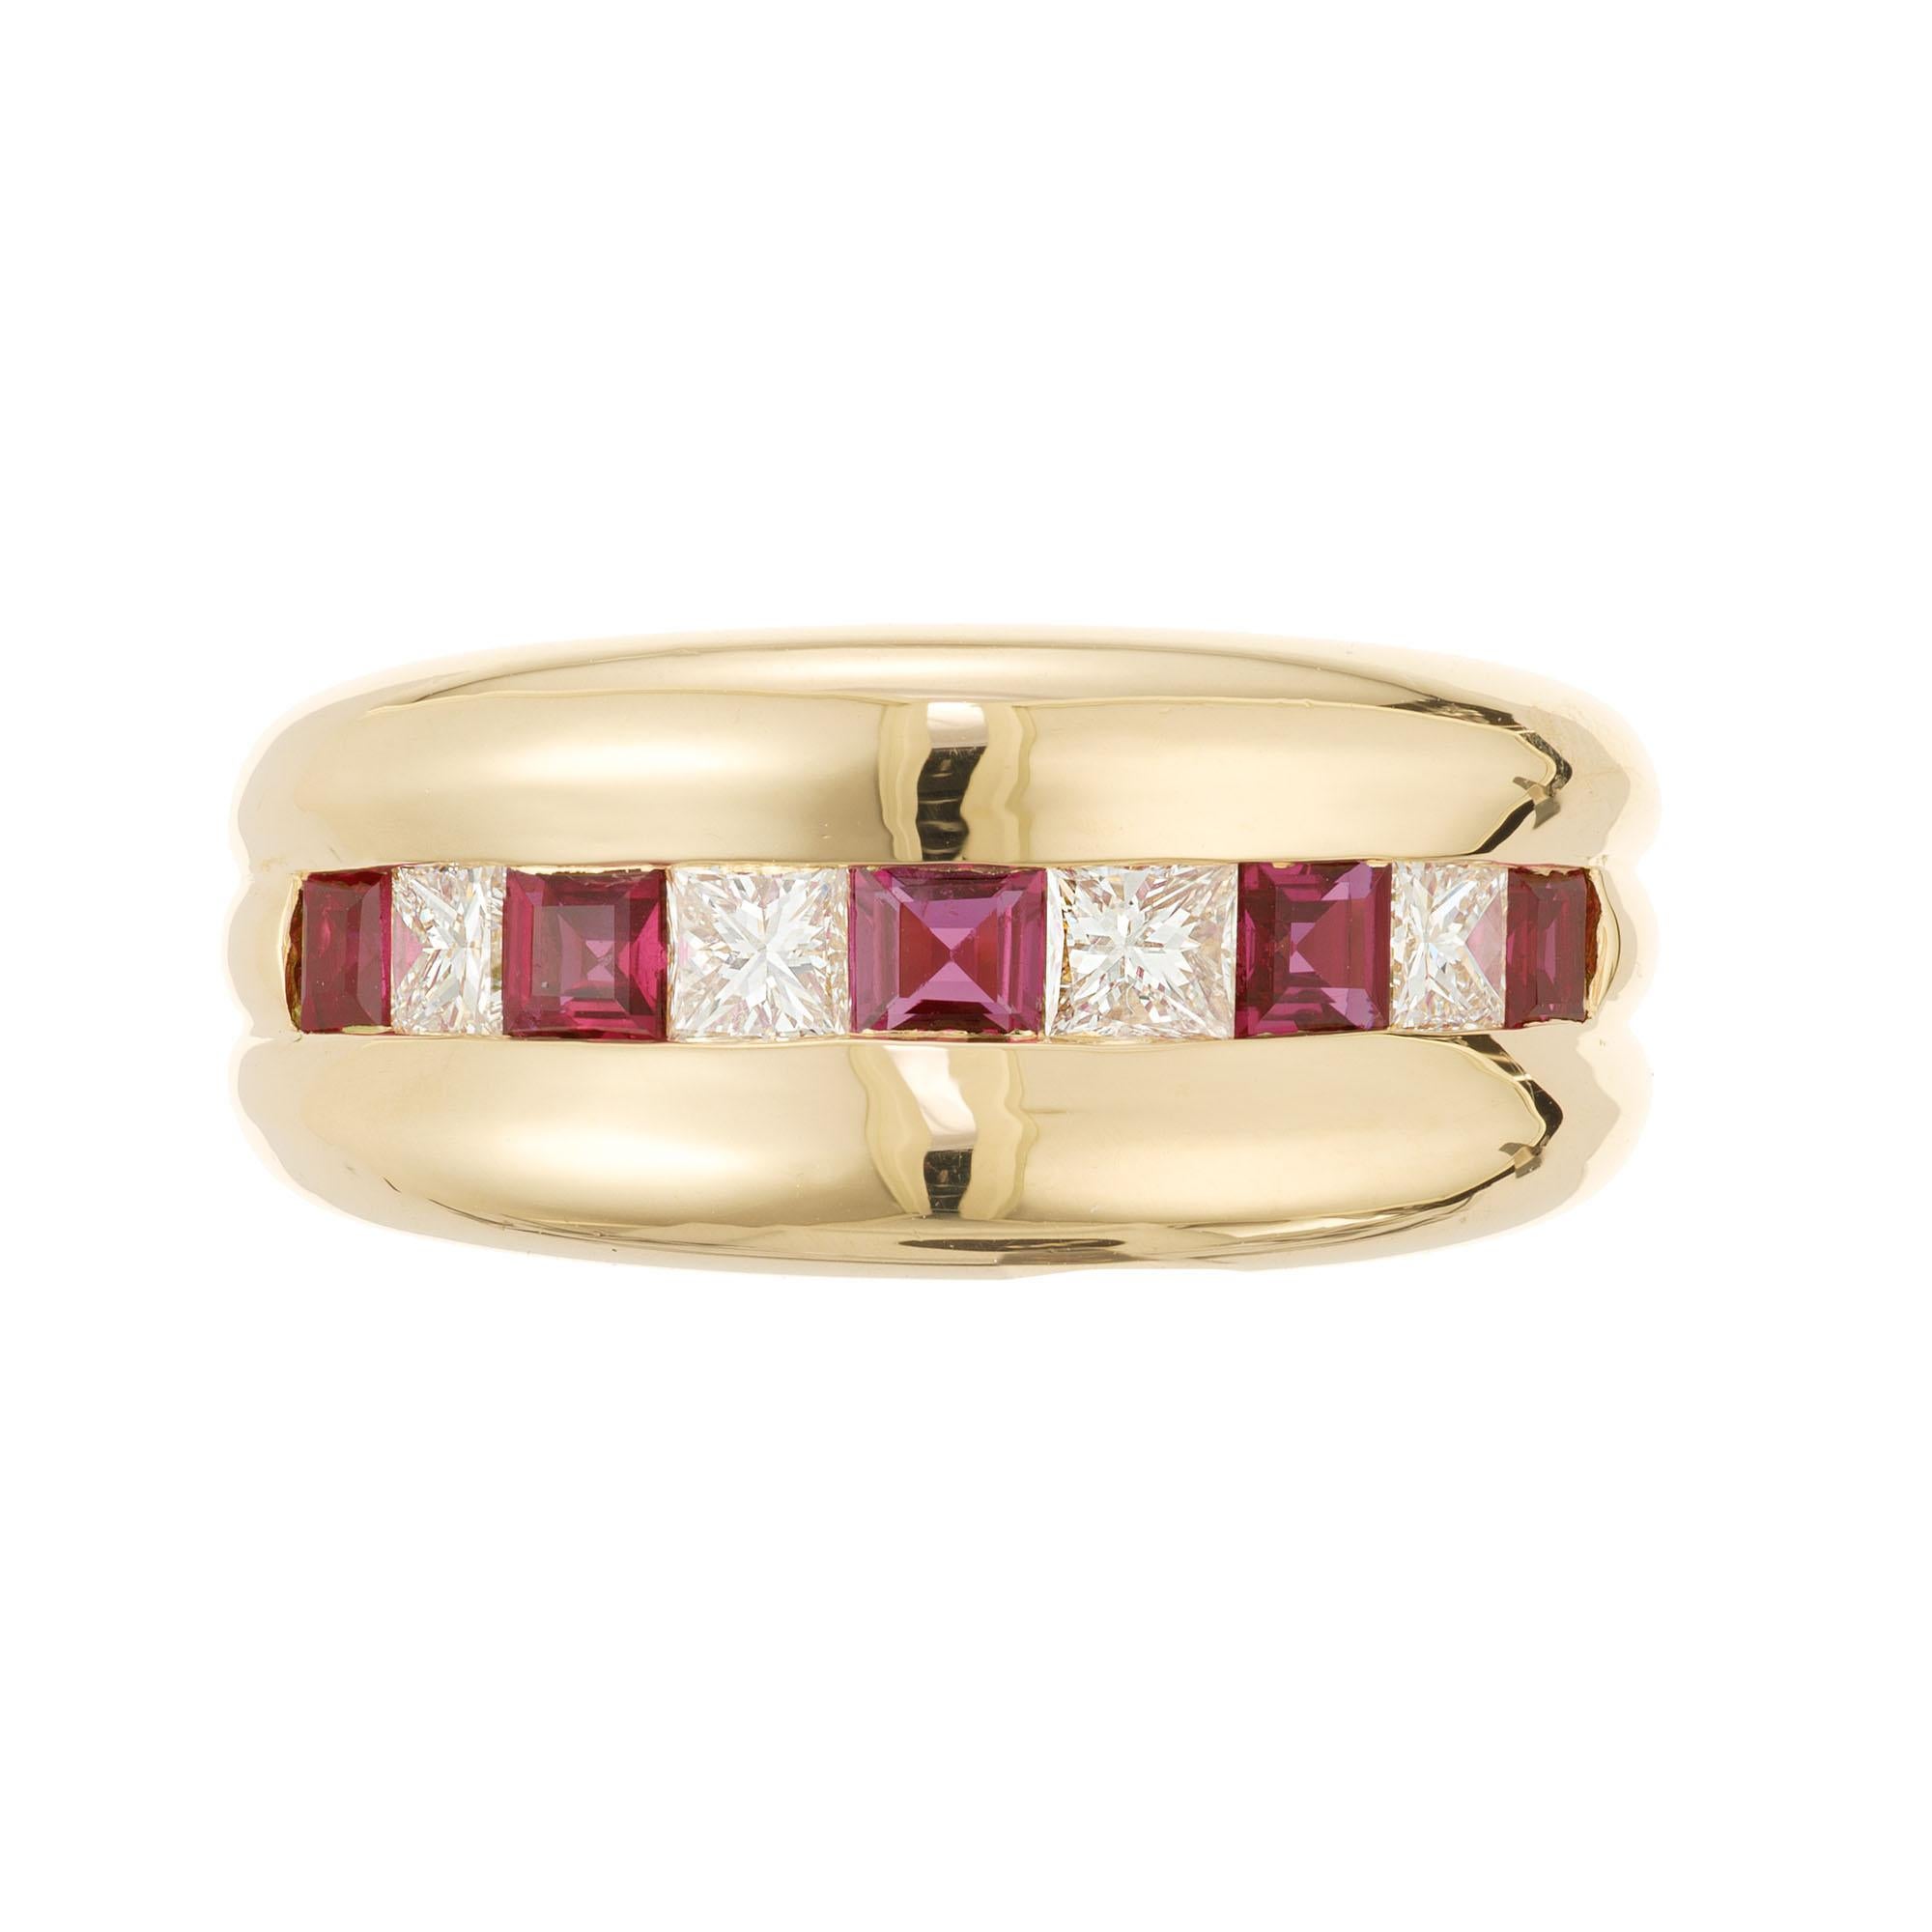 Ruby and diamond ring. Alternating 4 princess cut diamonds and 5 square cut rubies in at 18k yellow gold setting. 

5 square cut genuine red rubies, VS approx. .50cts
4 princess cut diamonds, G-H VS approx. .40cts
Size 6.75 and sizable 
18k yellow